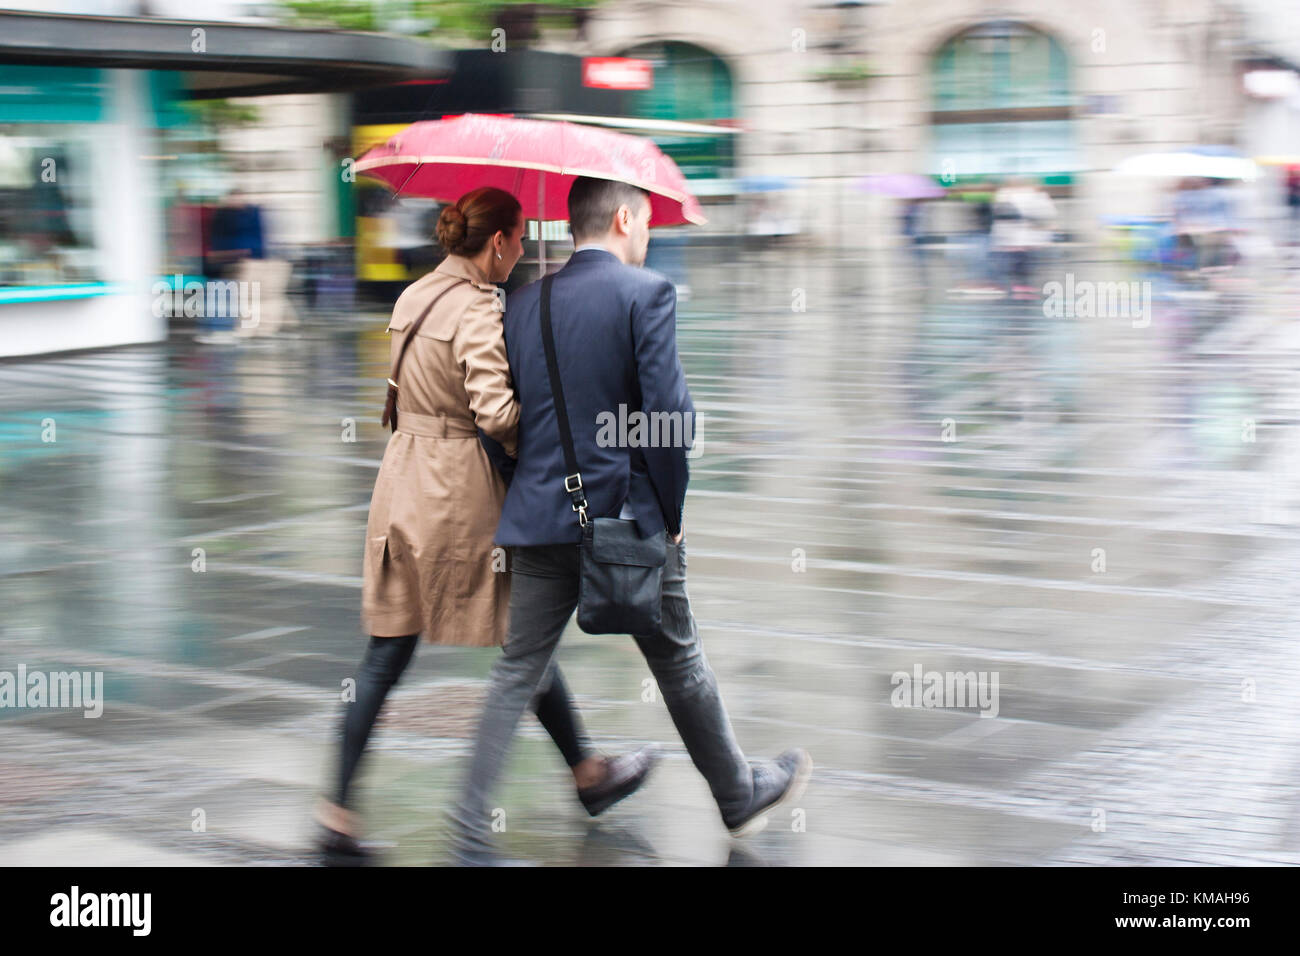 Belgrade, Serbia- May 5, 2017: Young man and woman walking in a hurry under umbrella on rainy and blurry city street Stock Photo